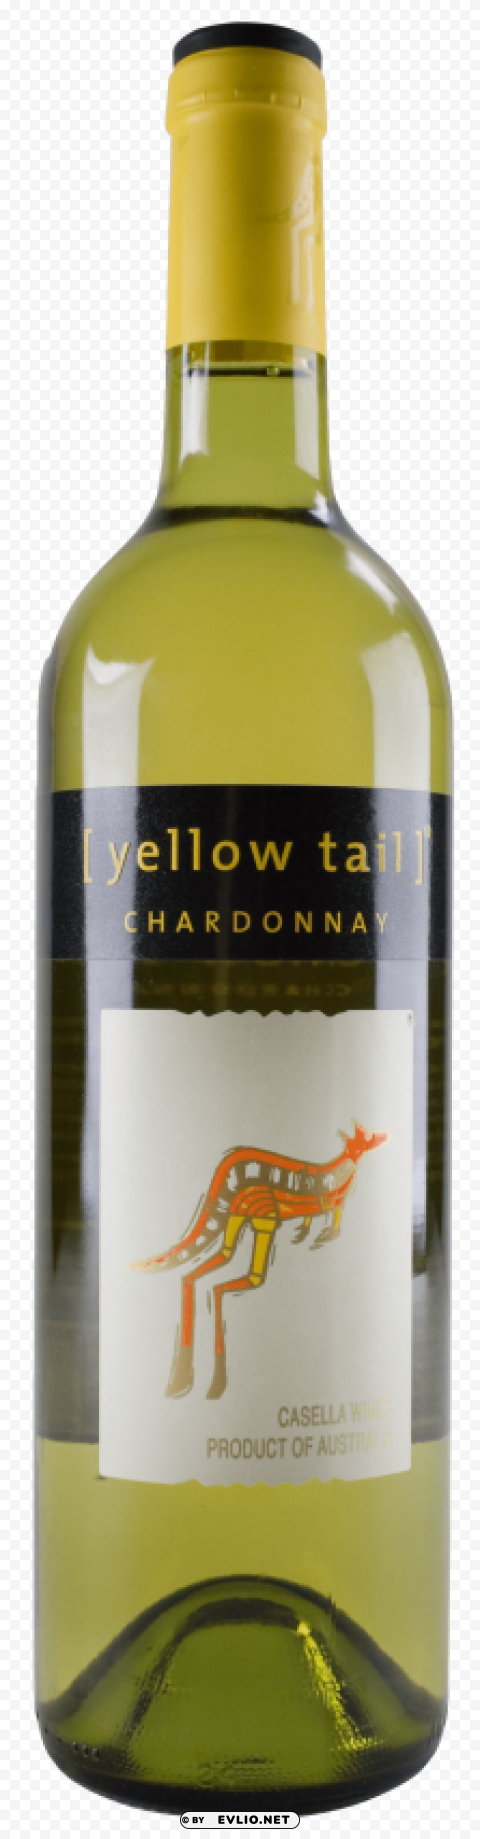 yellow tail wine bottle PNG for educational projects